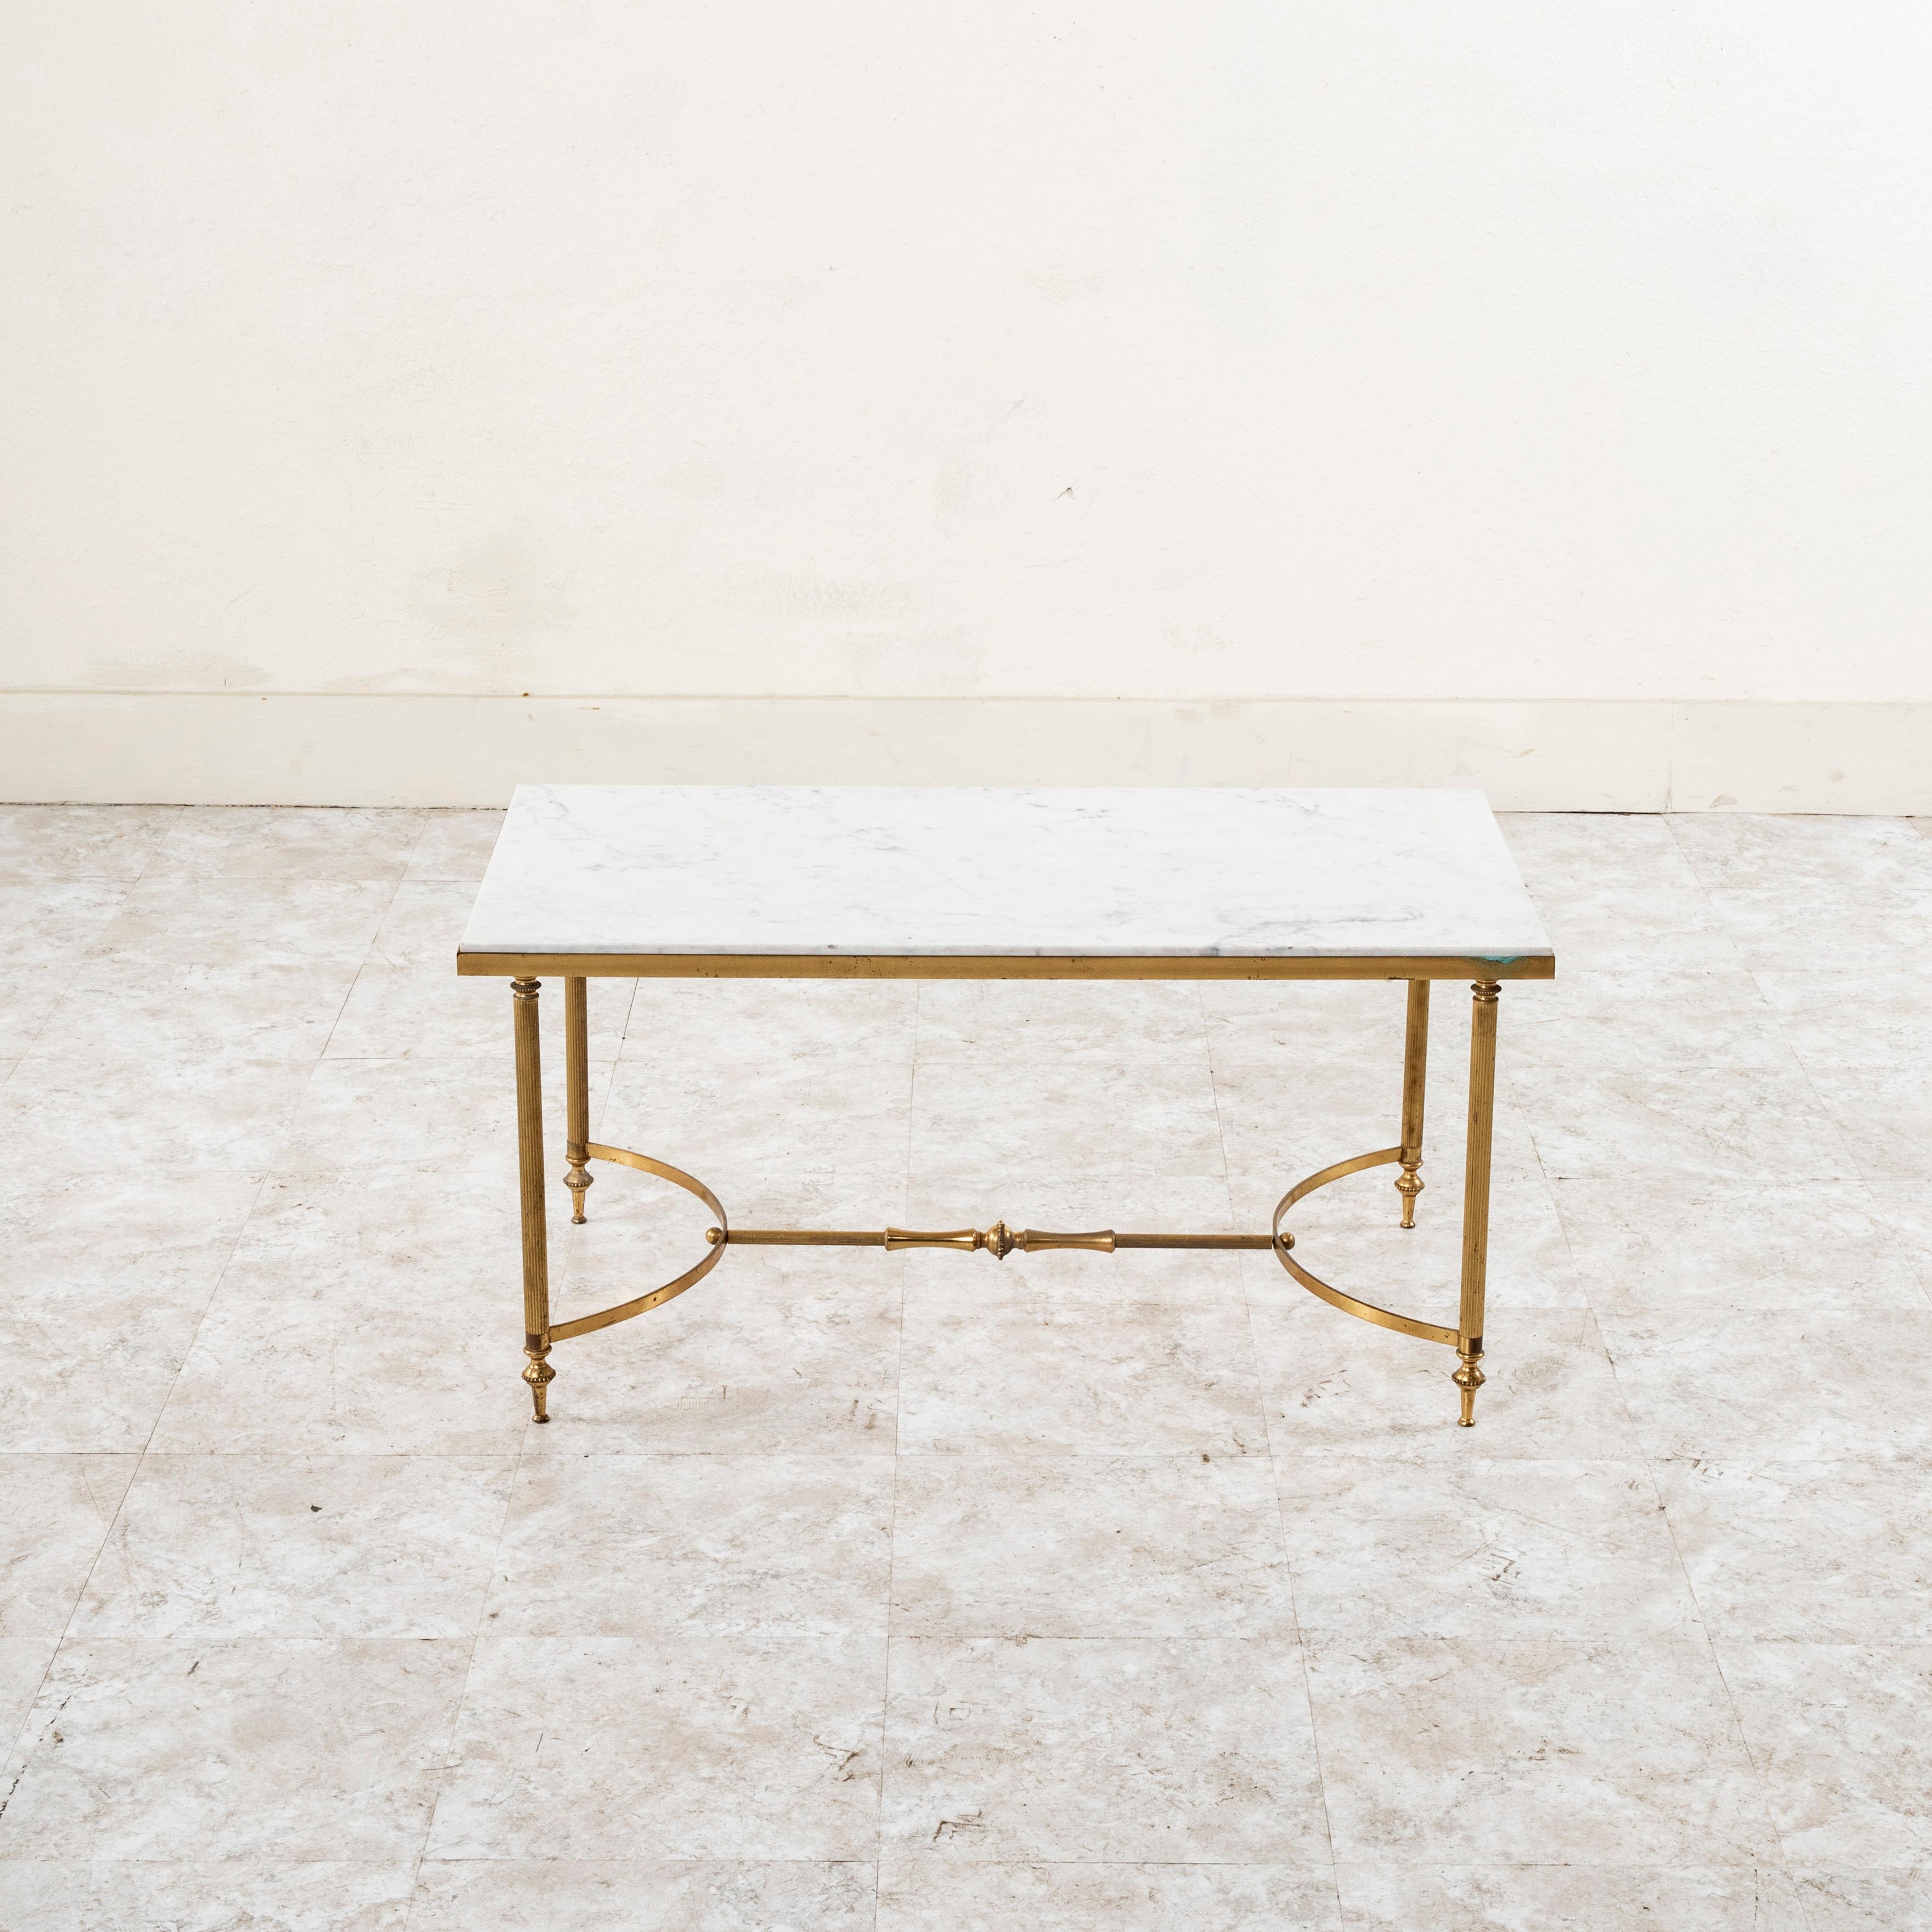 This midcentury French brass coffee table or cocktail table features a solid white marble top. The base is joined by an H stretcher with half circles on each side held firmly in place by a central rod finished with a finial at each end. Its four